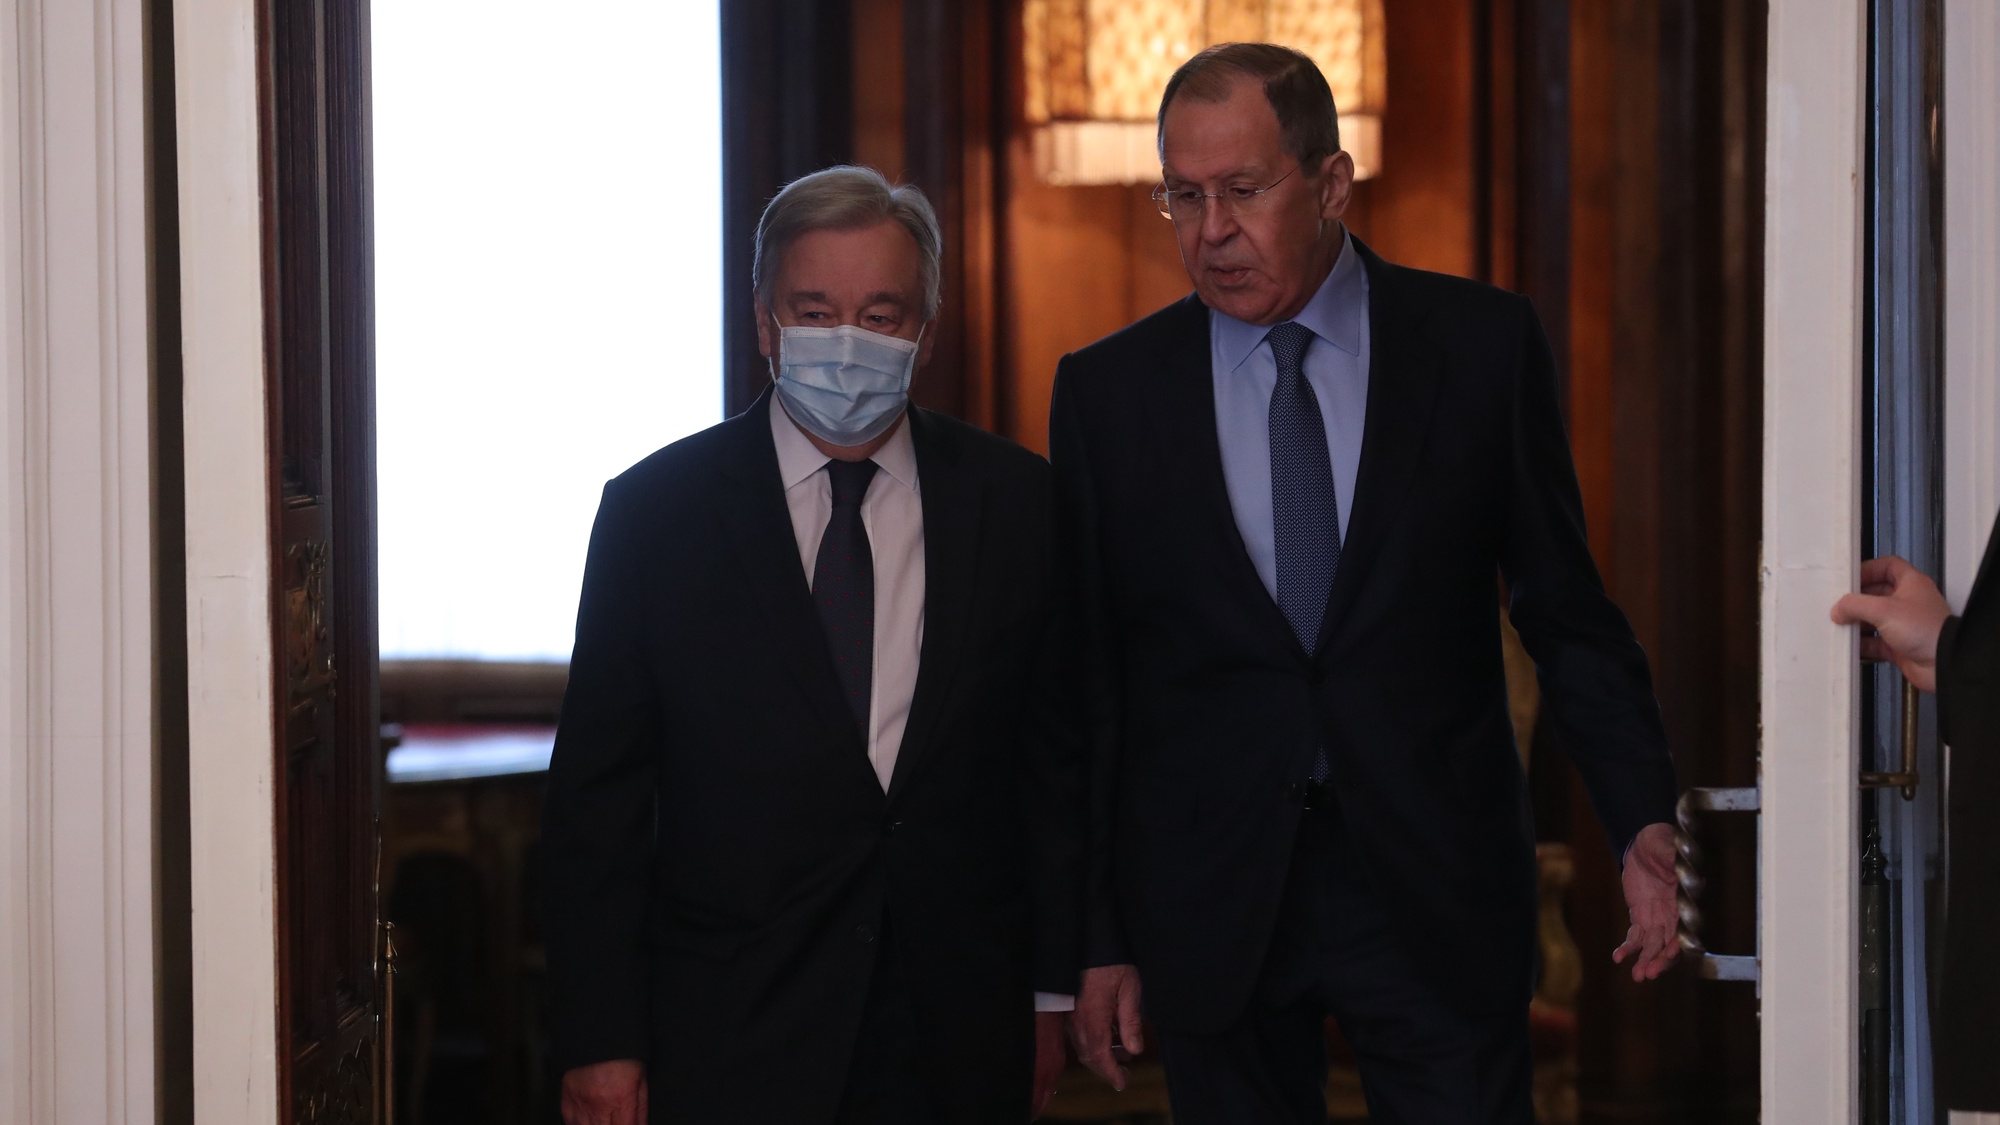 epa09909593 Russian Foreign Minister Sergei Lavrov and UN Secretary-General Antonio Guterres meet in Moscow, Russia, 26 April 2022. UN Secretary-General is on a working visit to Moscow.  EPA/MAXIM SHIPENKOV / POOL